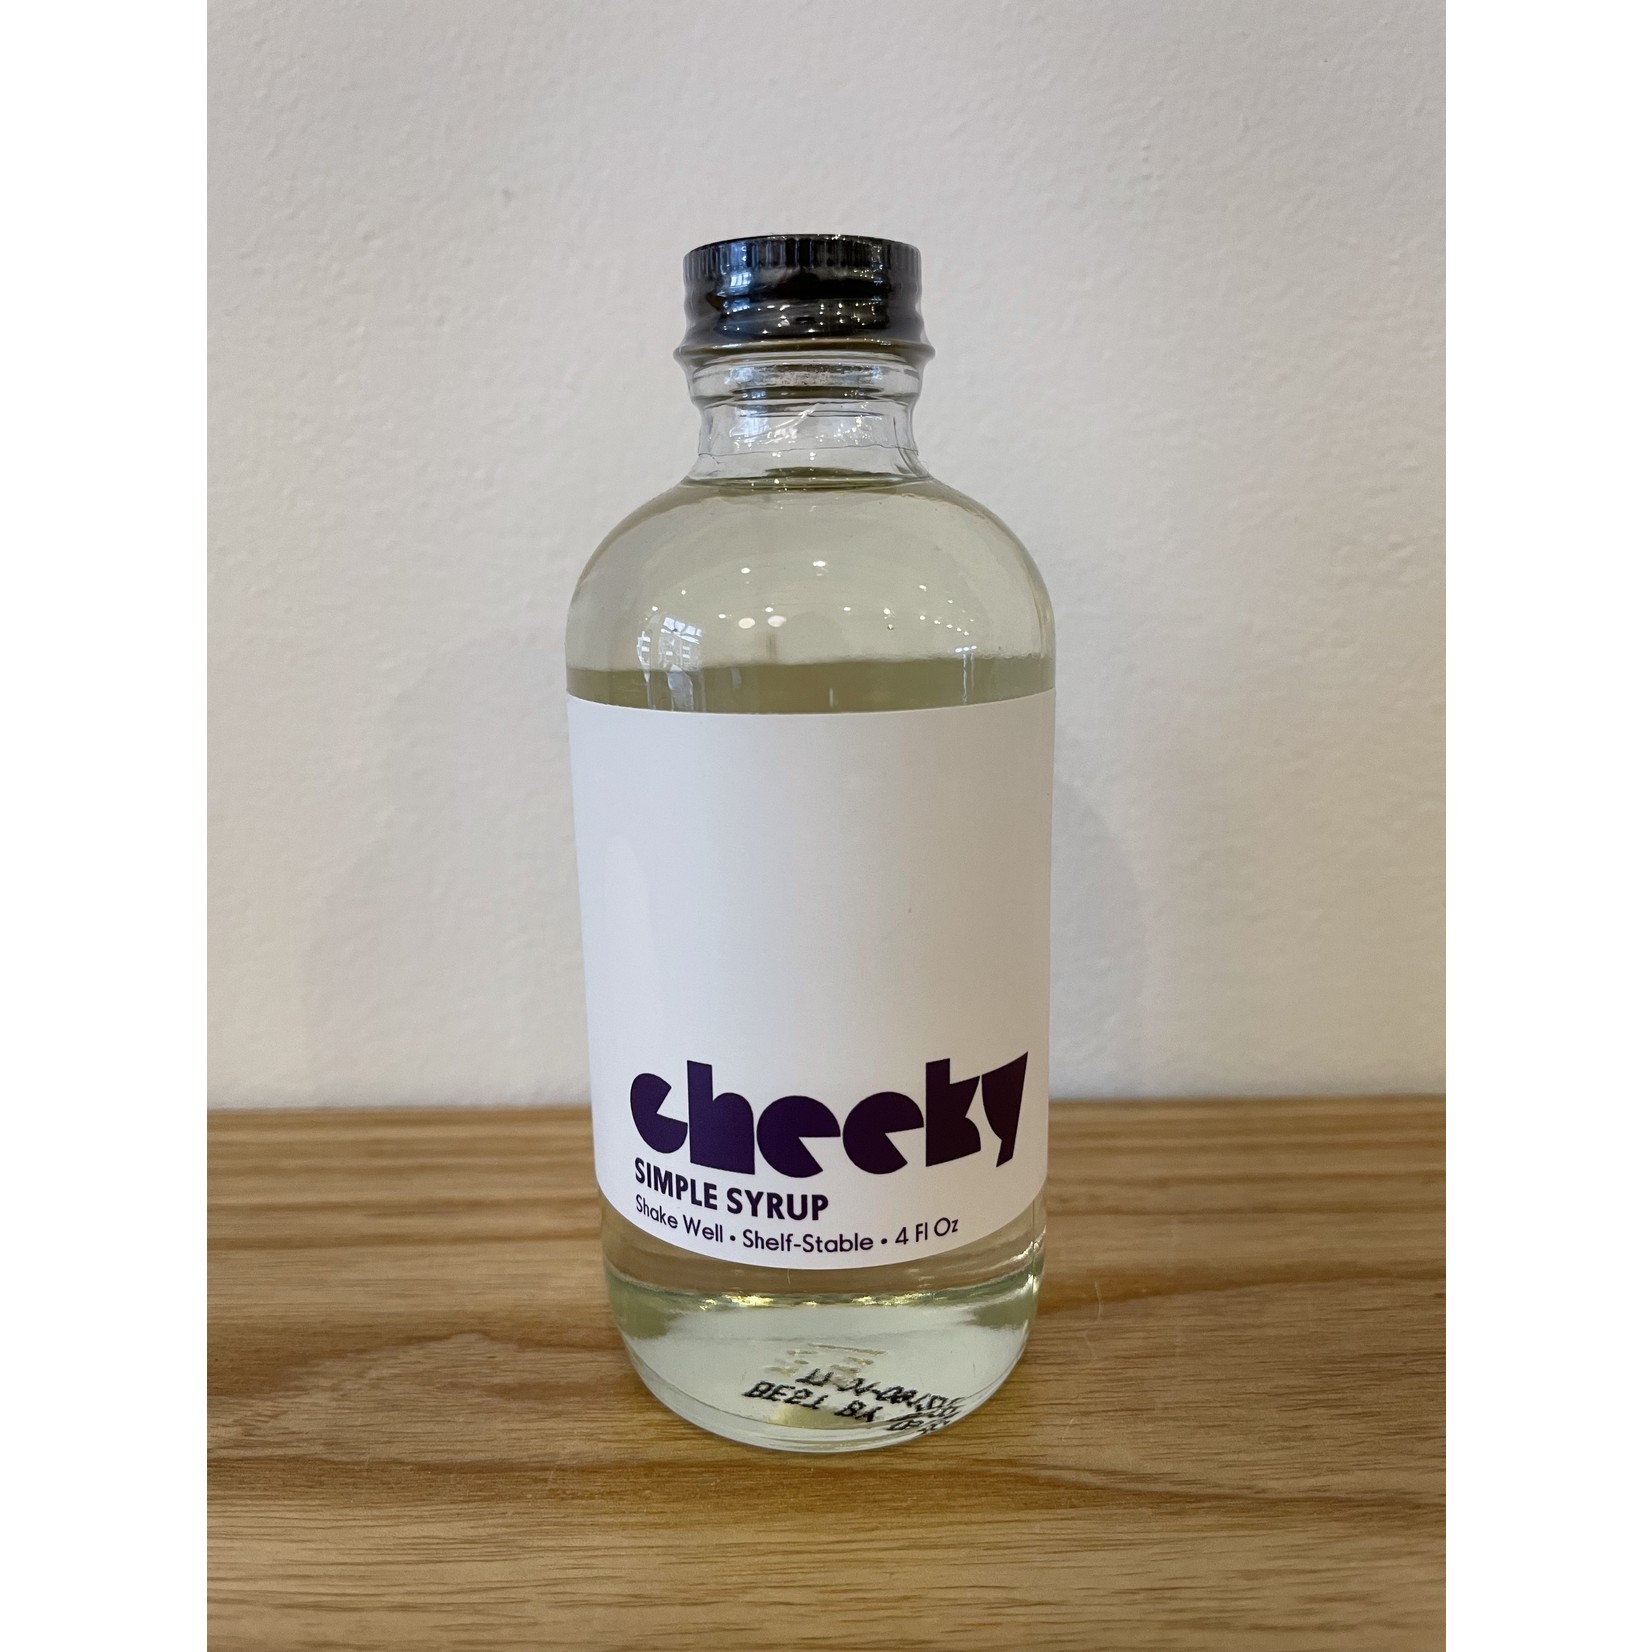 Cheeky Cheeky Cocktails Simple Syrup 4 oz.